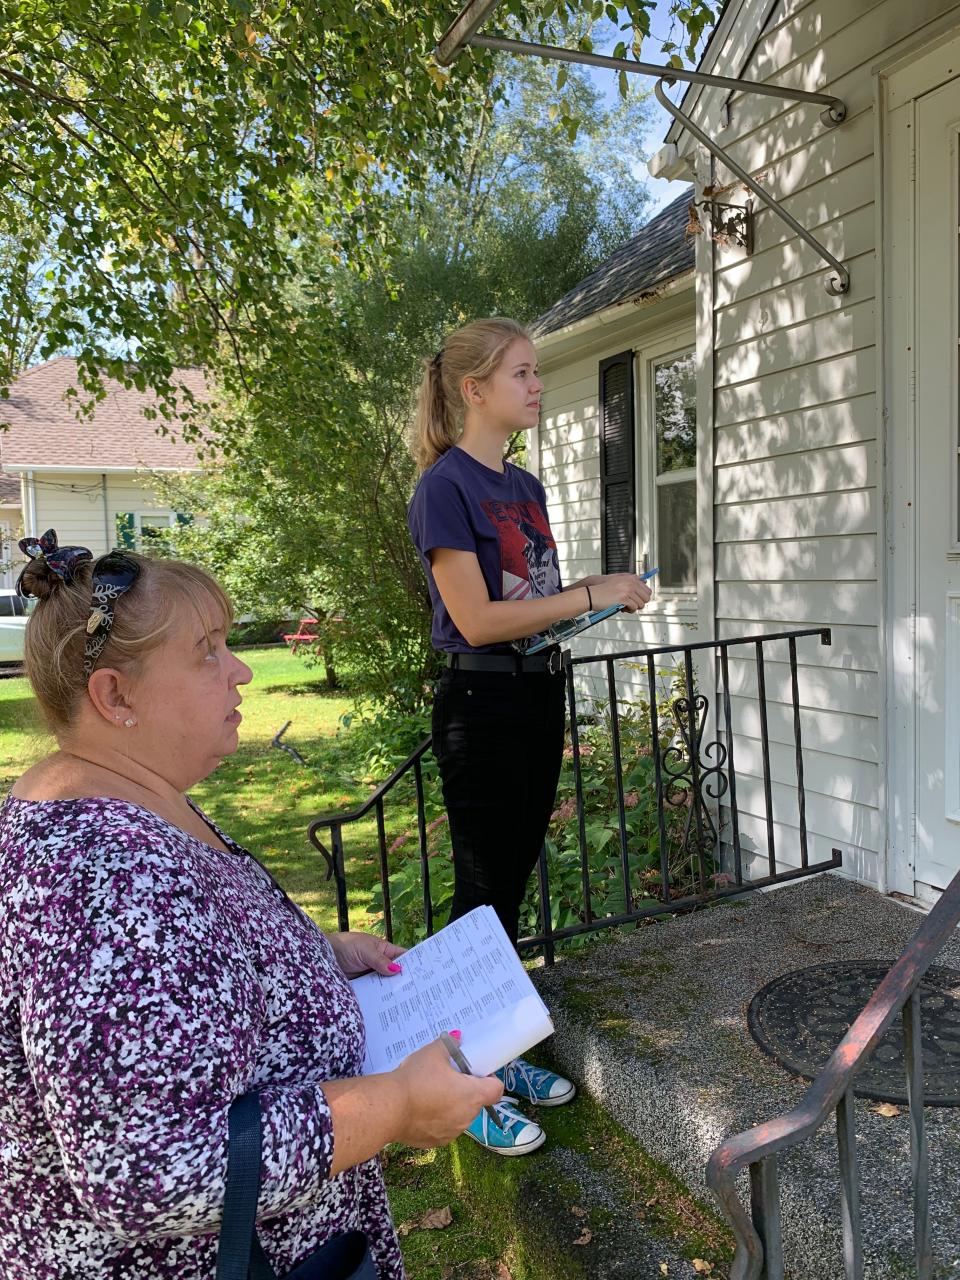 Democratic Party activists Hayley Bird (right) and Joan Garski canvass in Stevens Point, Wis. more than 13 months before the 2020 presidential election.